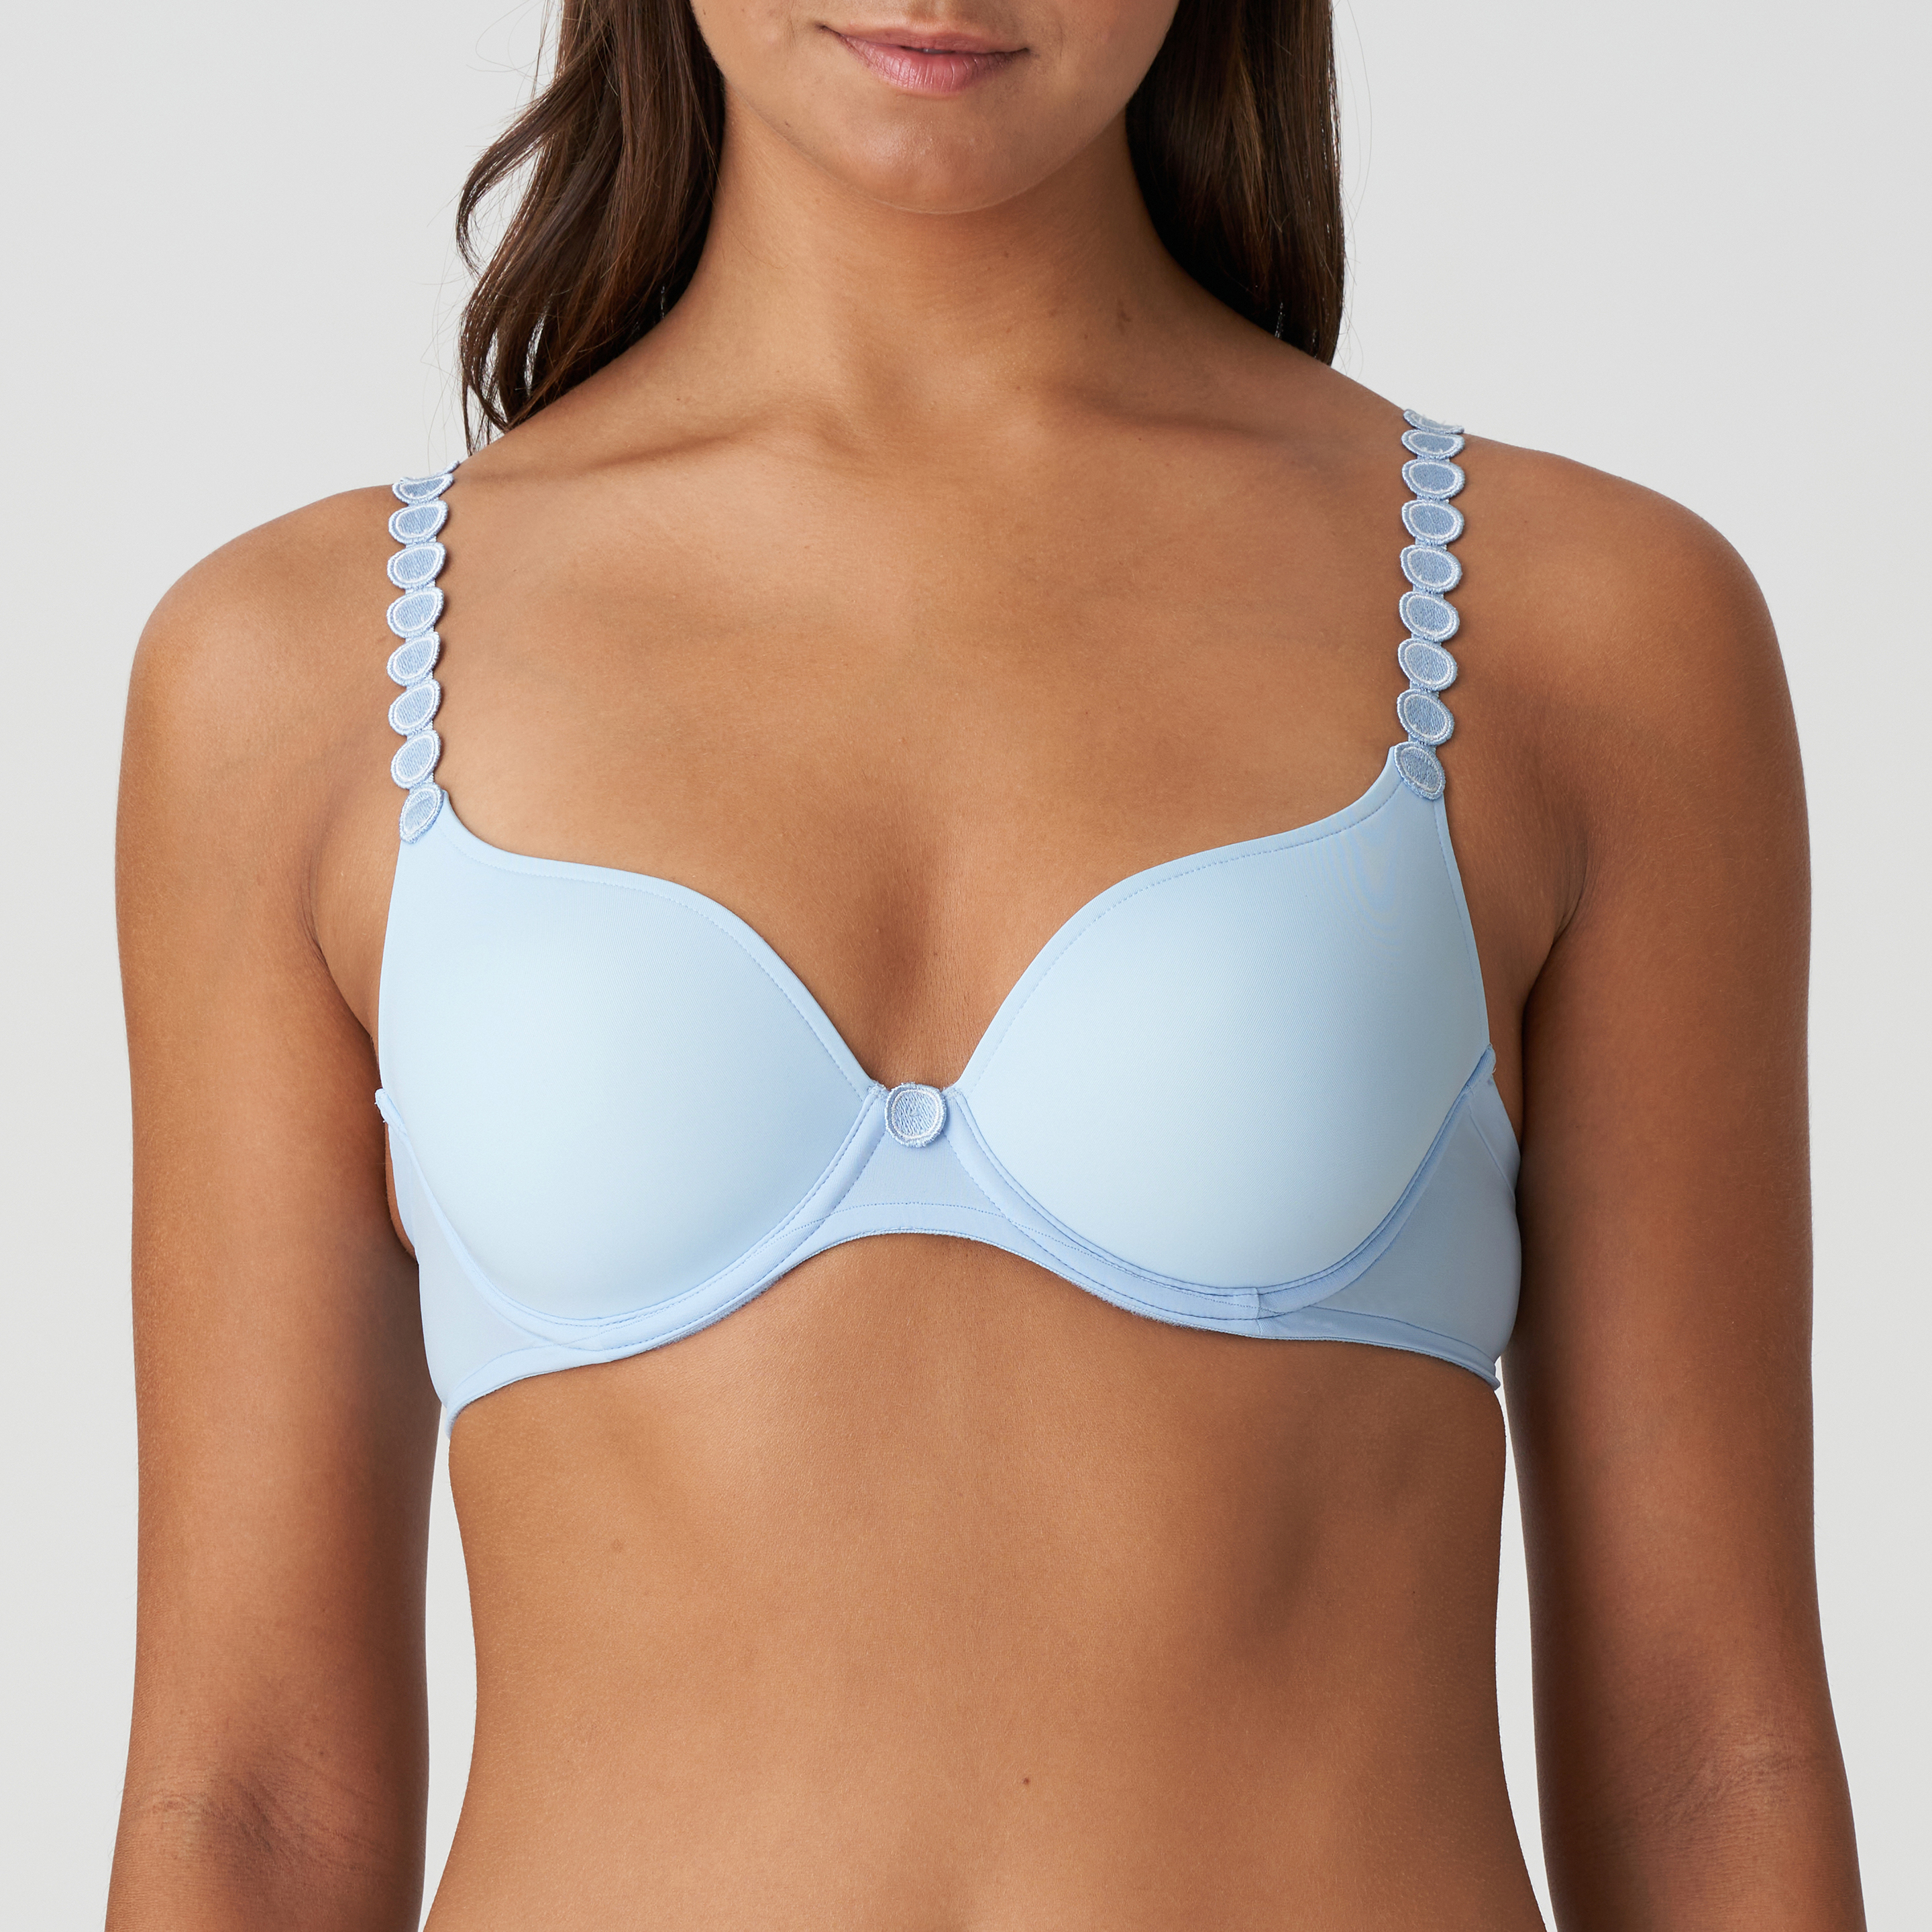 CLOSED] Instagram Giveaway: Marie Jo Daphne Bra size 32A (ends 1/7